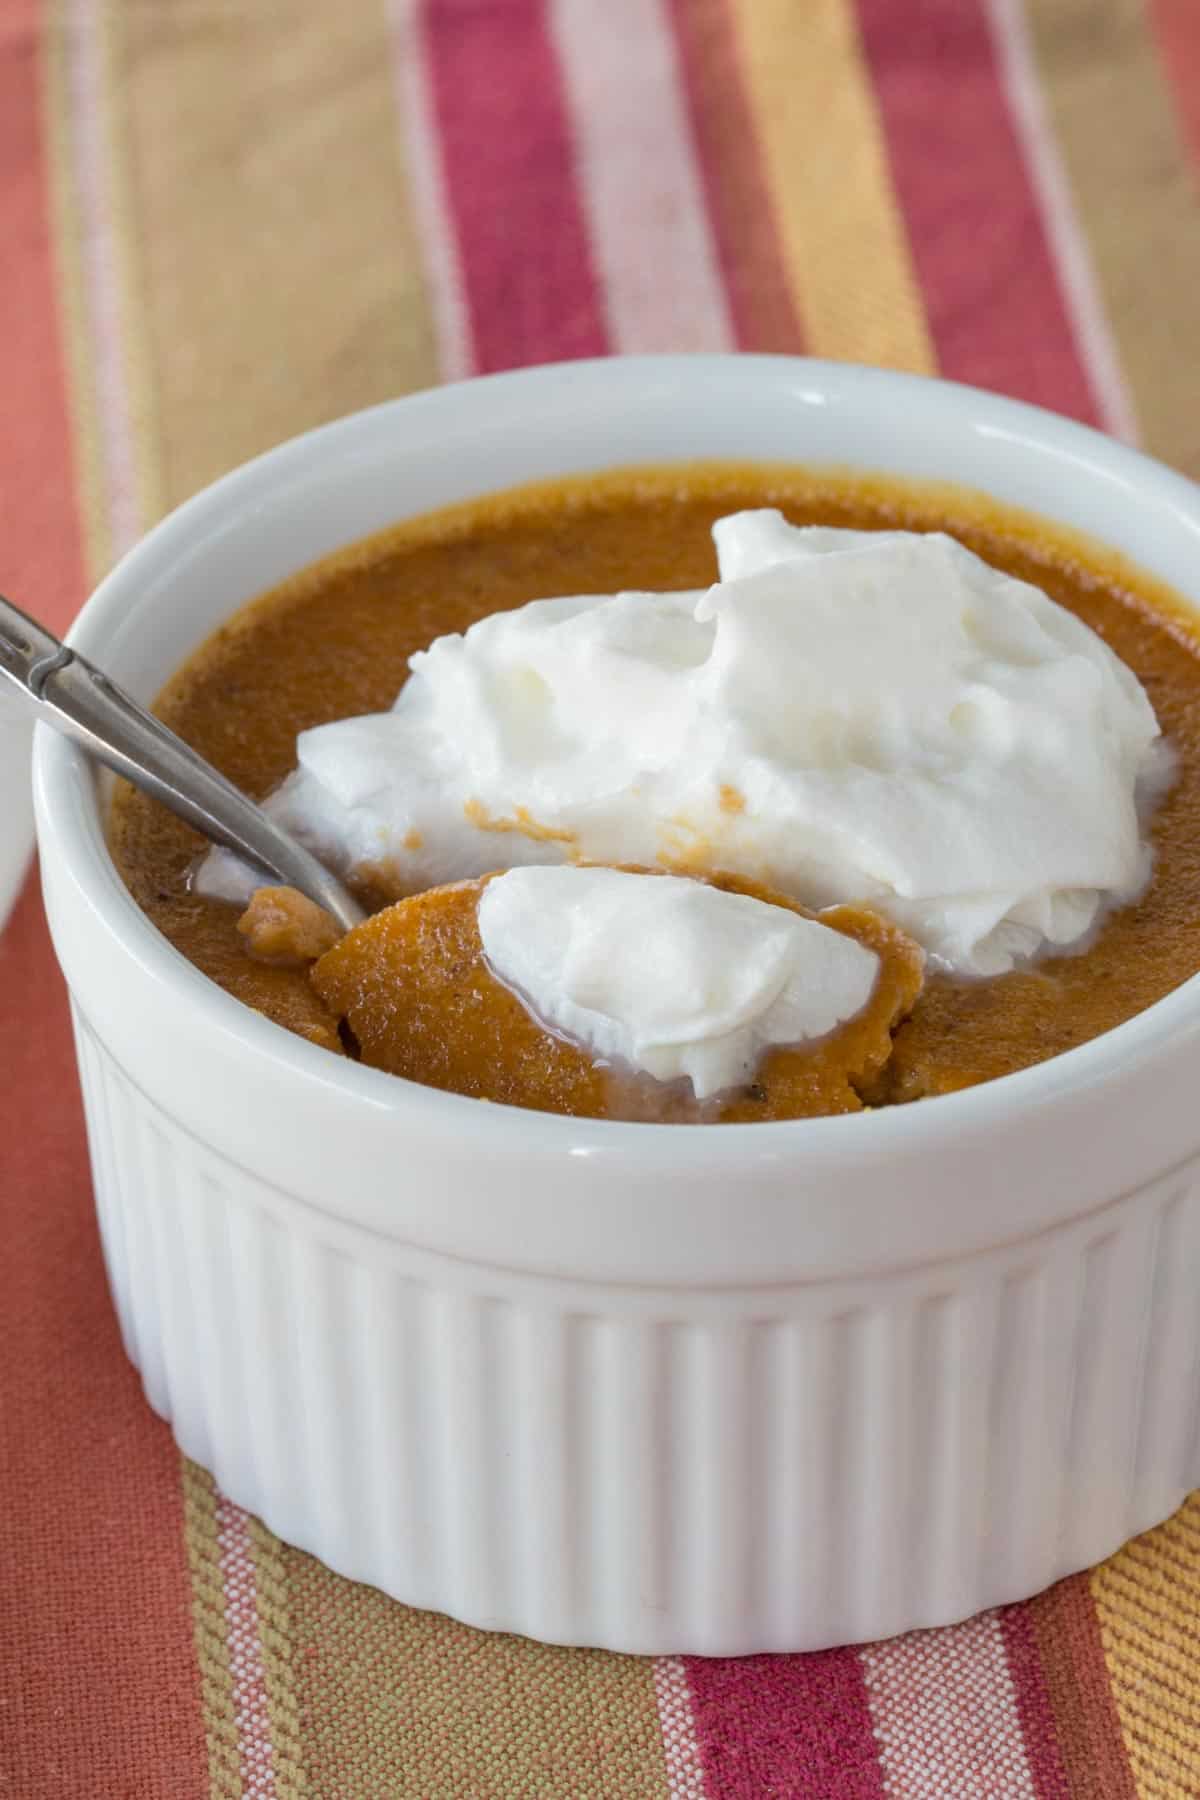 using a spoon to get a bite of crustless pumpkin pie with whipped cream